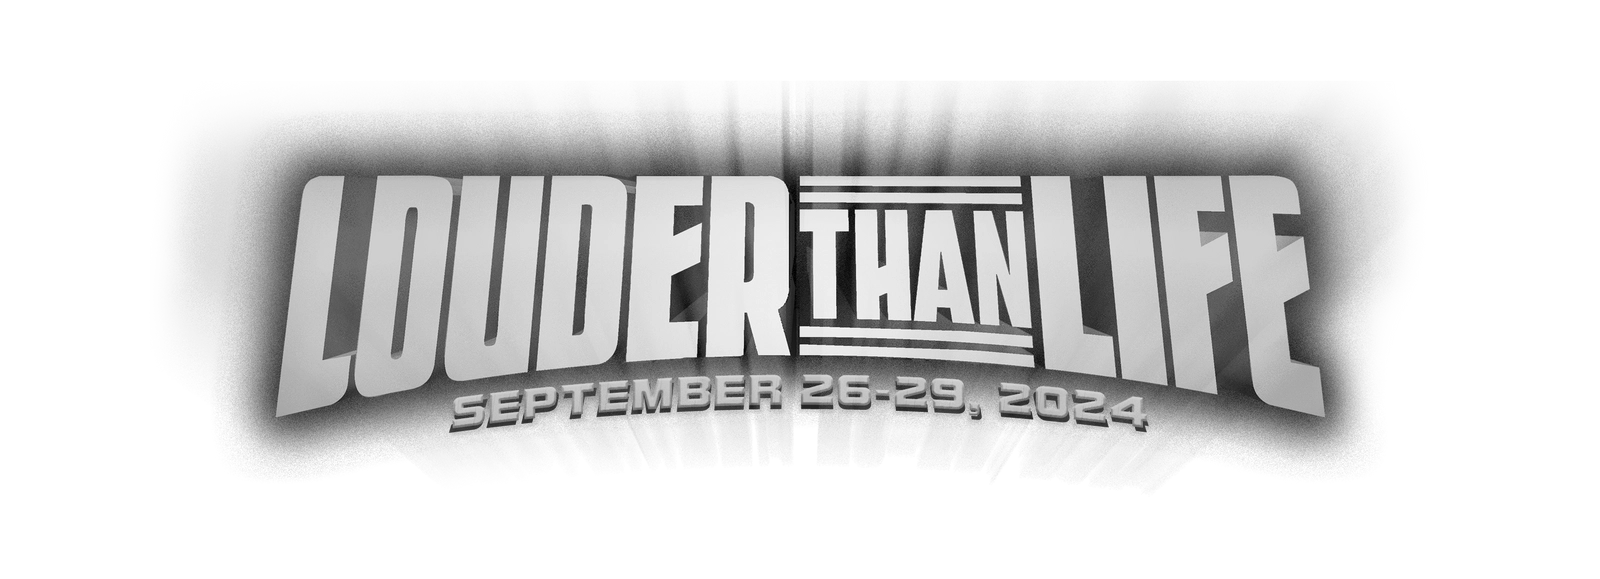 Louder than Life 2024 Sept 26 29th The Highland Festival Grounds